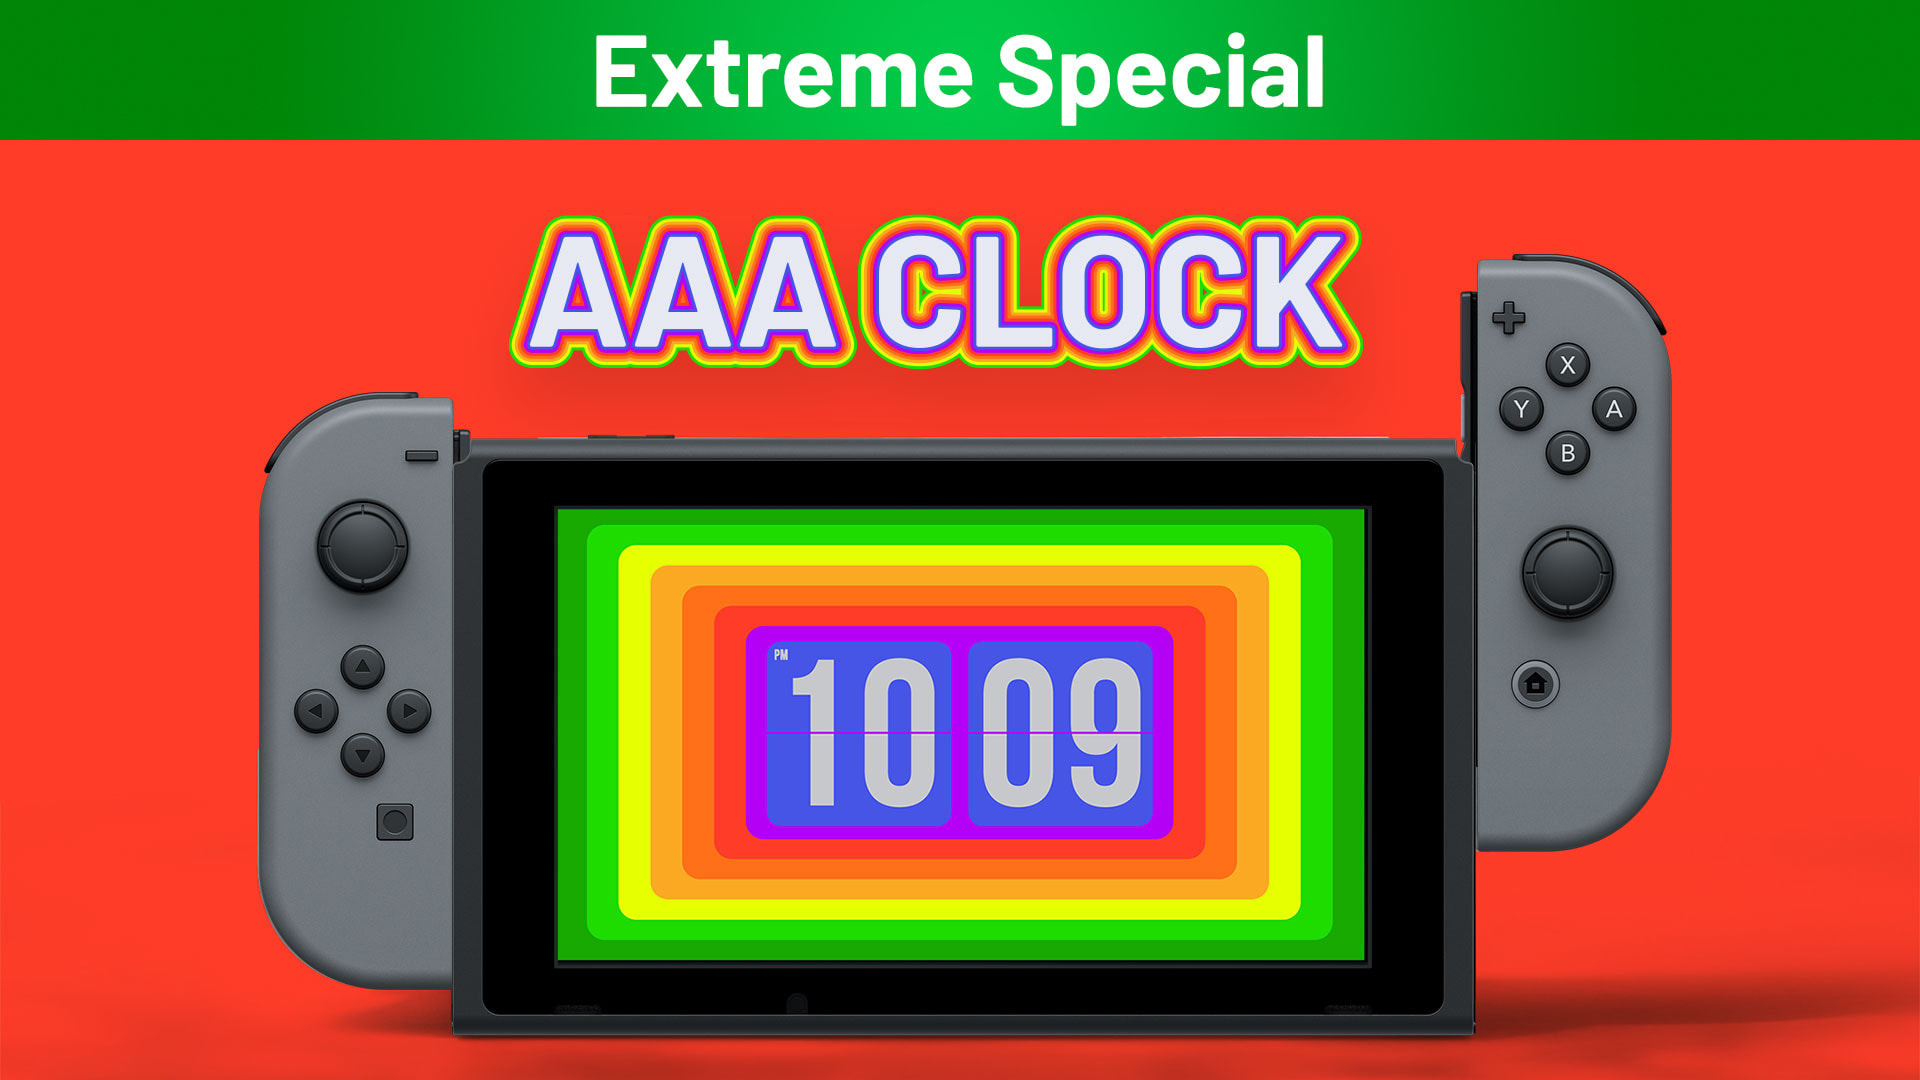 AAA Clock Extreme Special